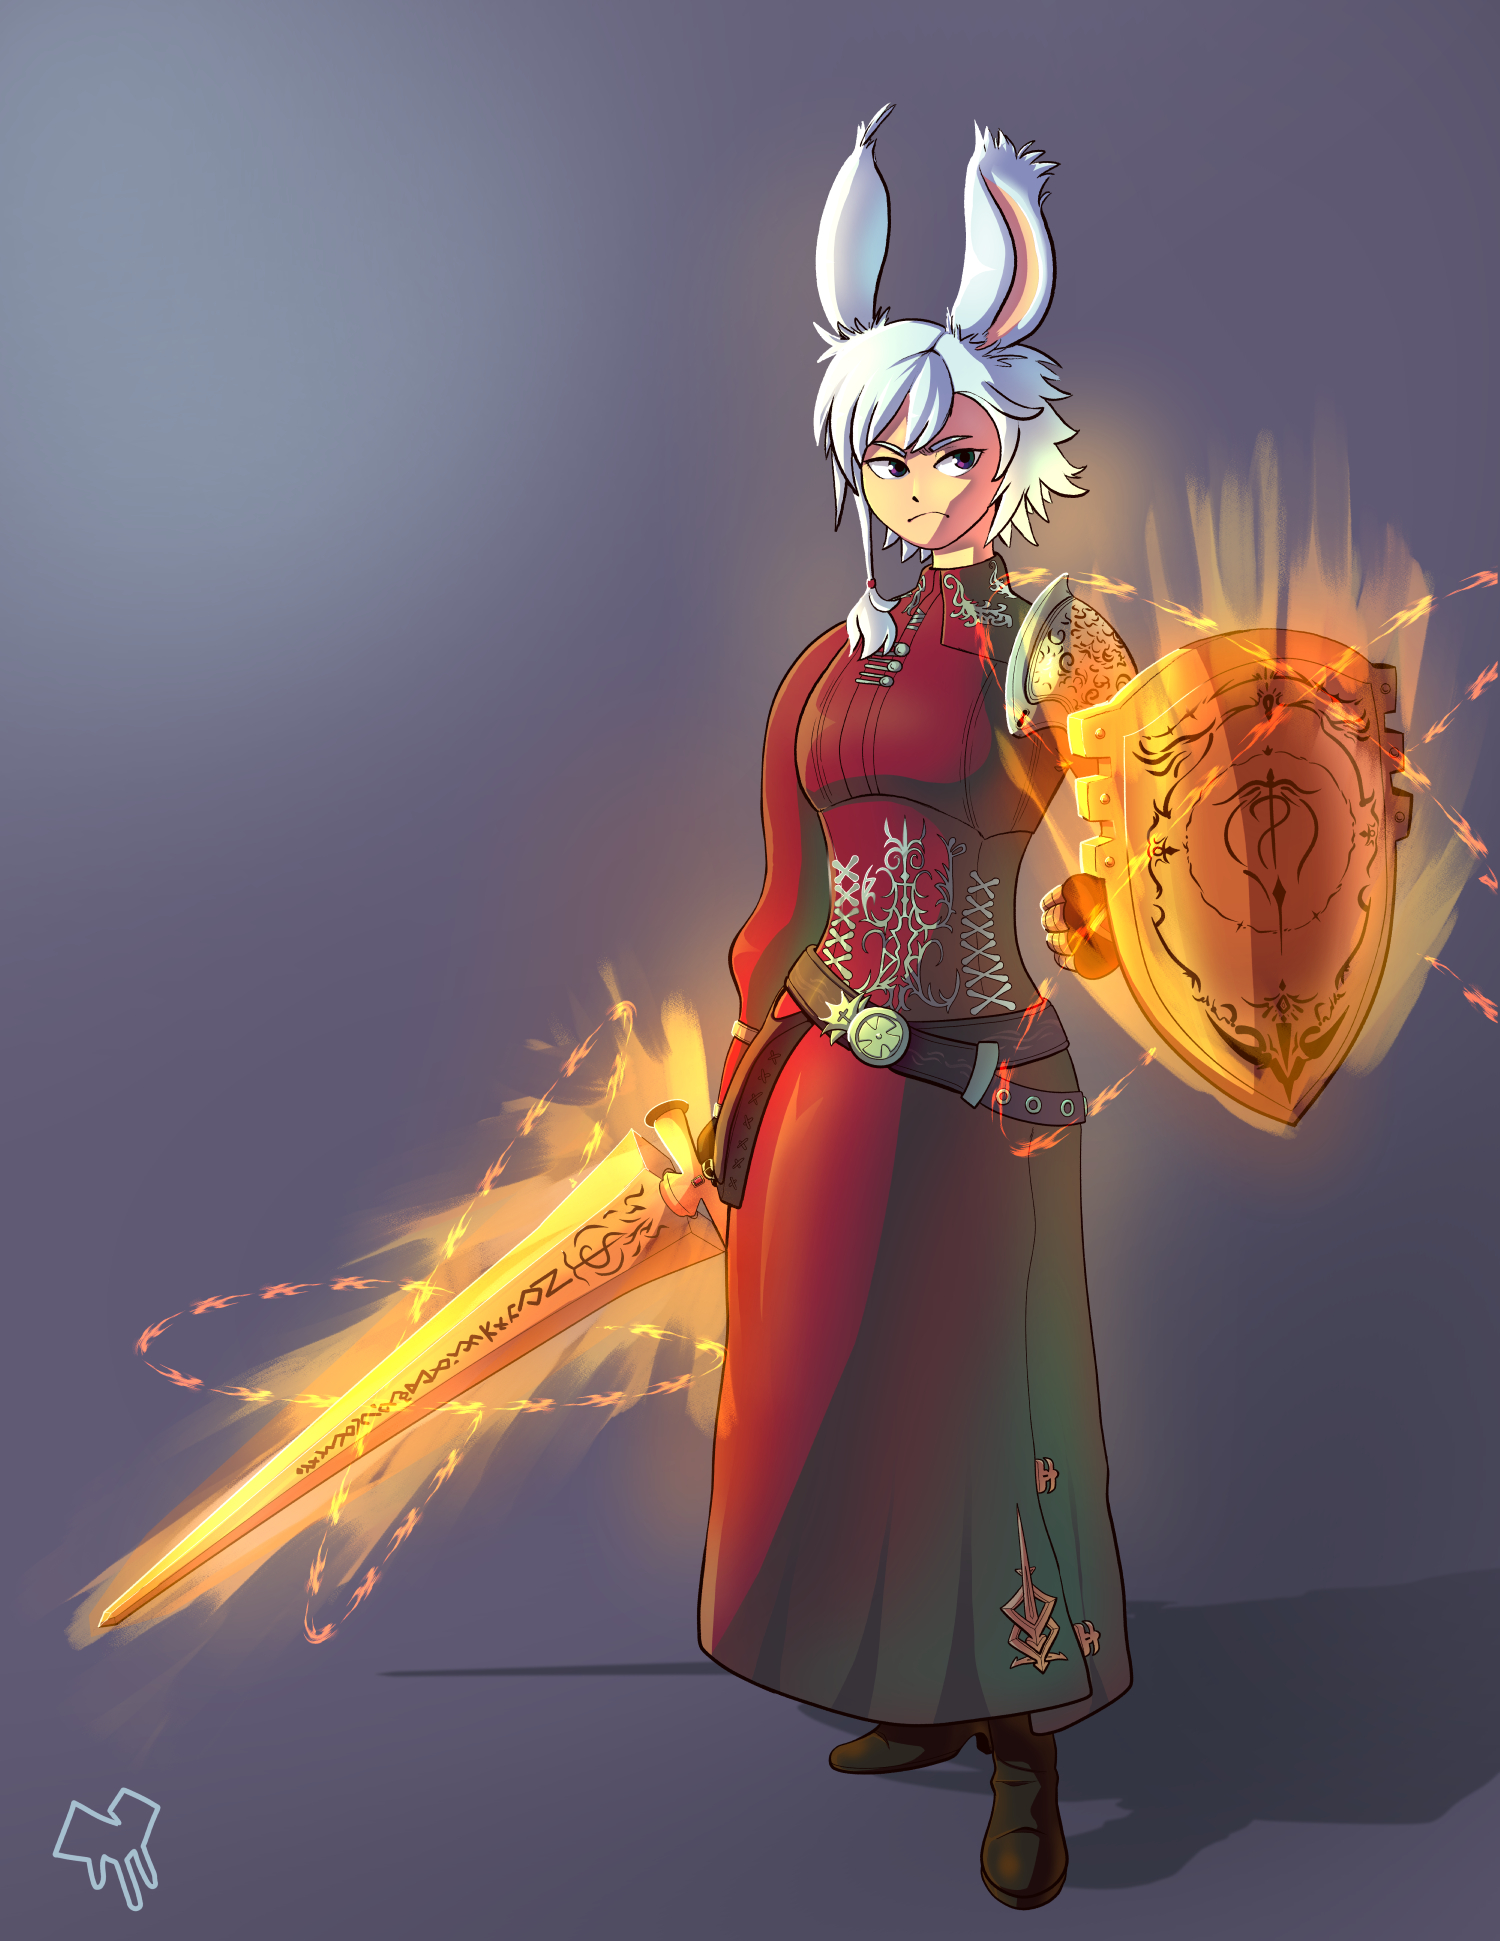 A Friend's FF Online Character With A Fire Sword